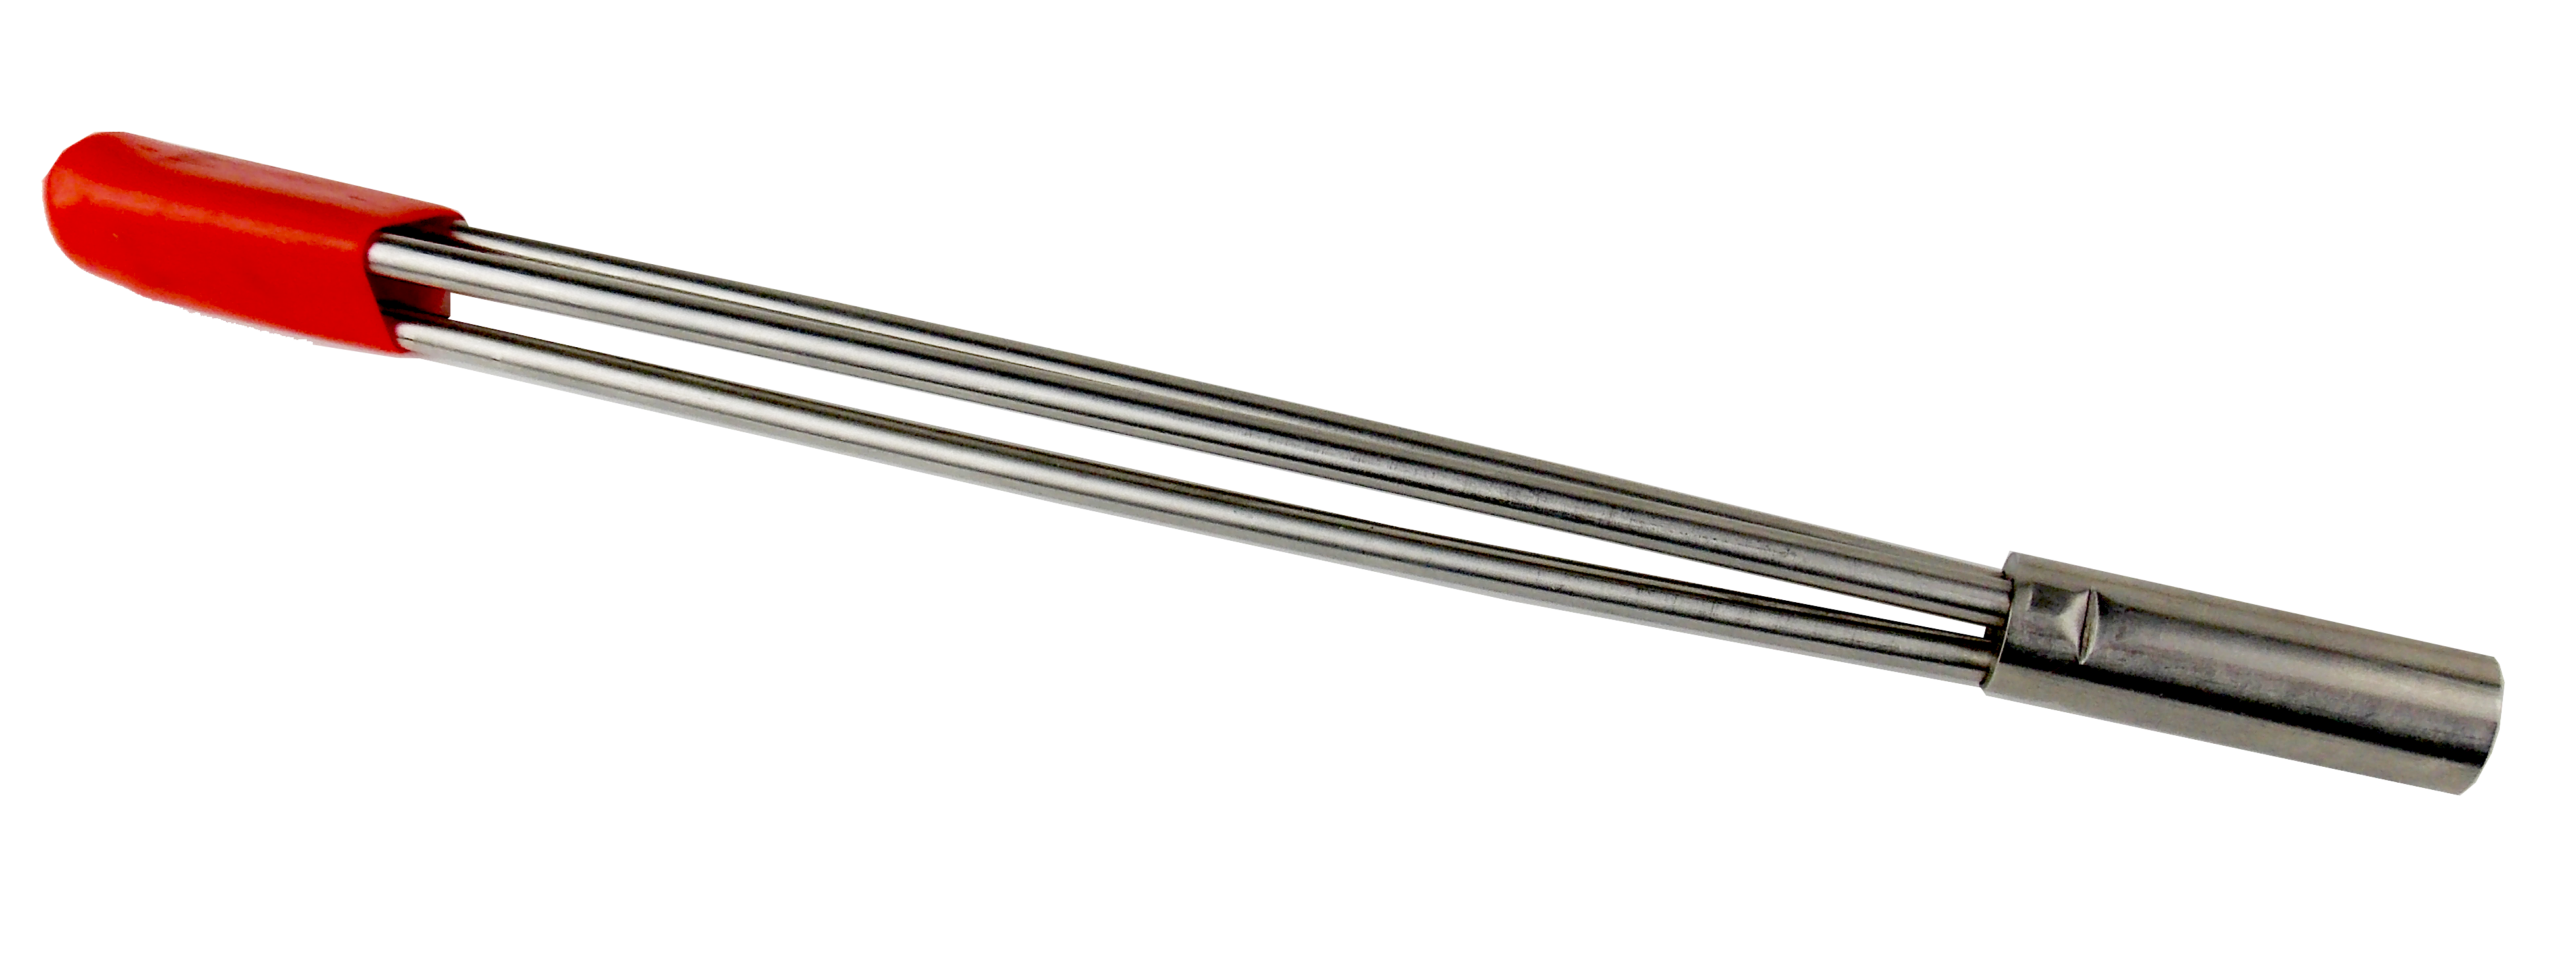 Drophog - SS - 11 Inch - 11" - 3 Prong Barbed Paralyzer Tip